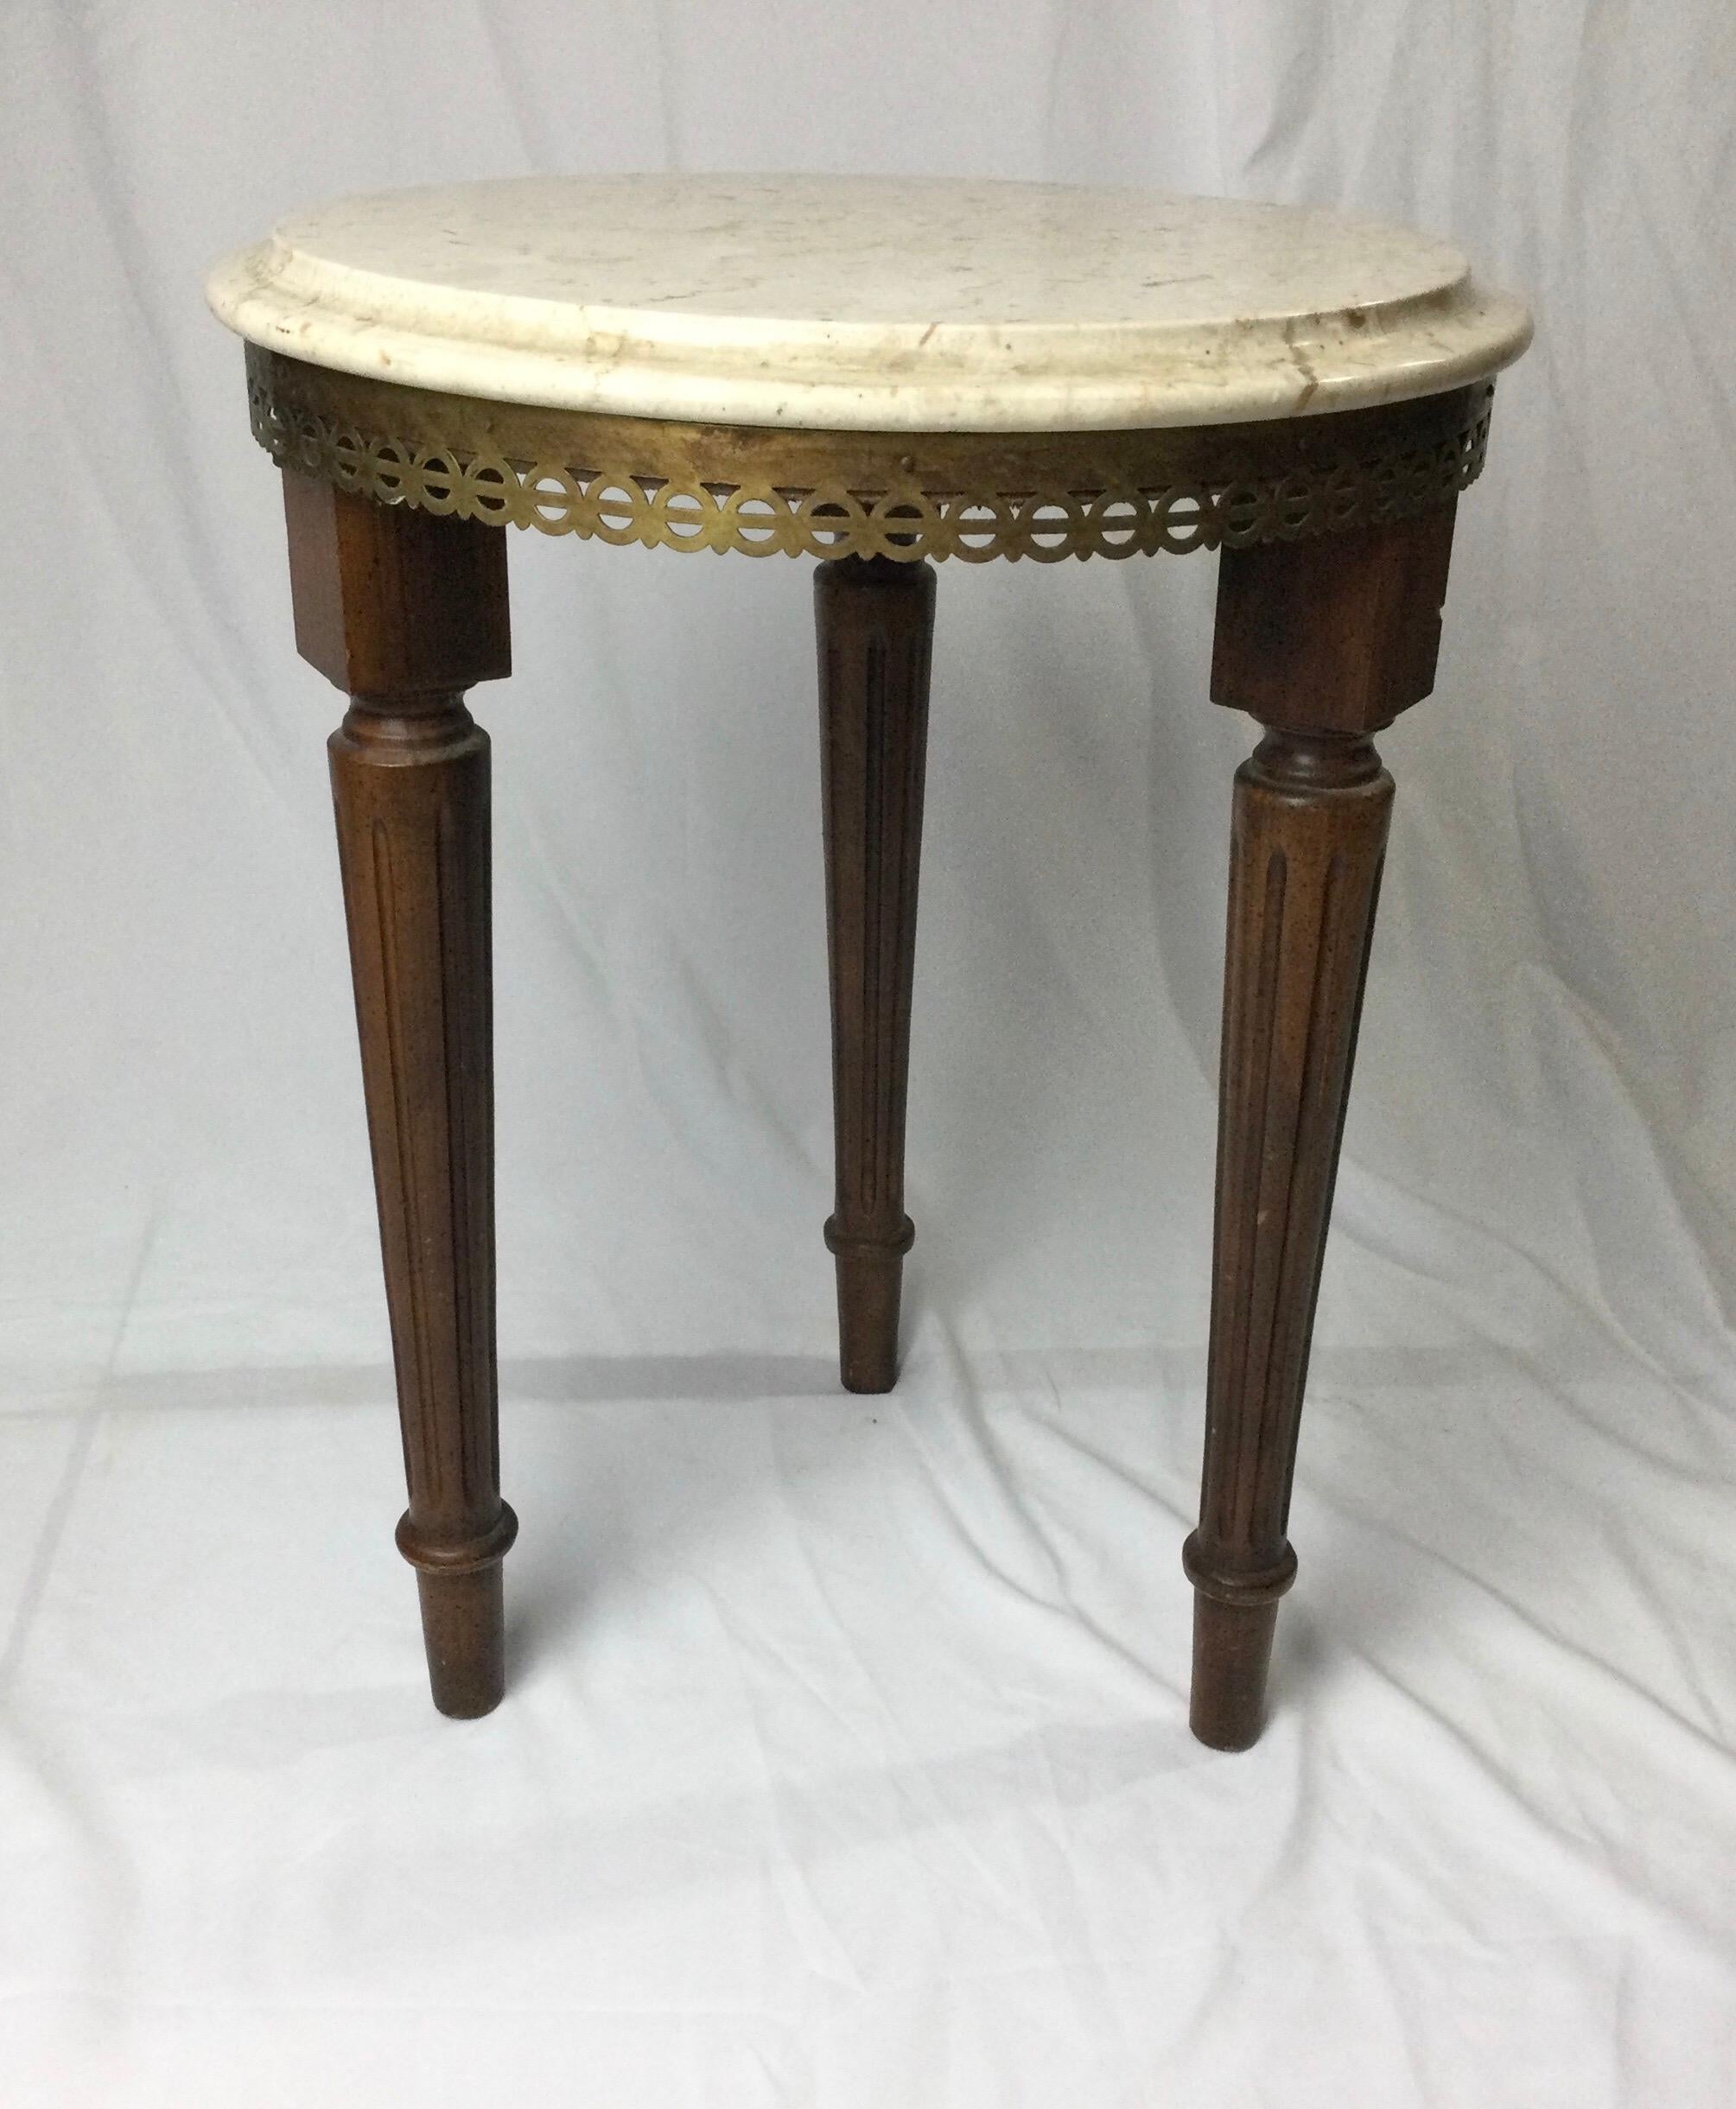 Wonderful little drink stand or plant stand with marble top. 14” in diameter and 18” tall. Dark brass trim above fluted tapered legs. Age appropriate wear. Tinny flea bite to the edge of marble.